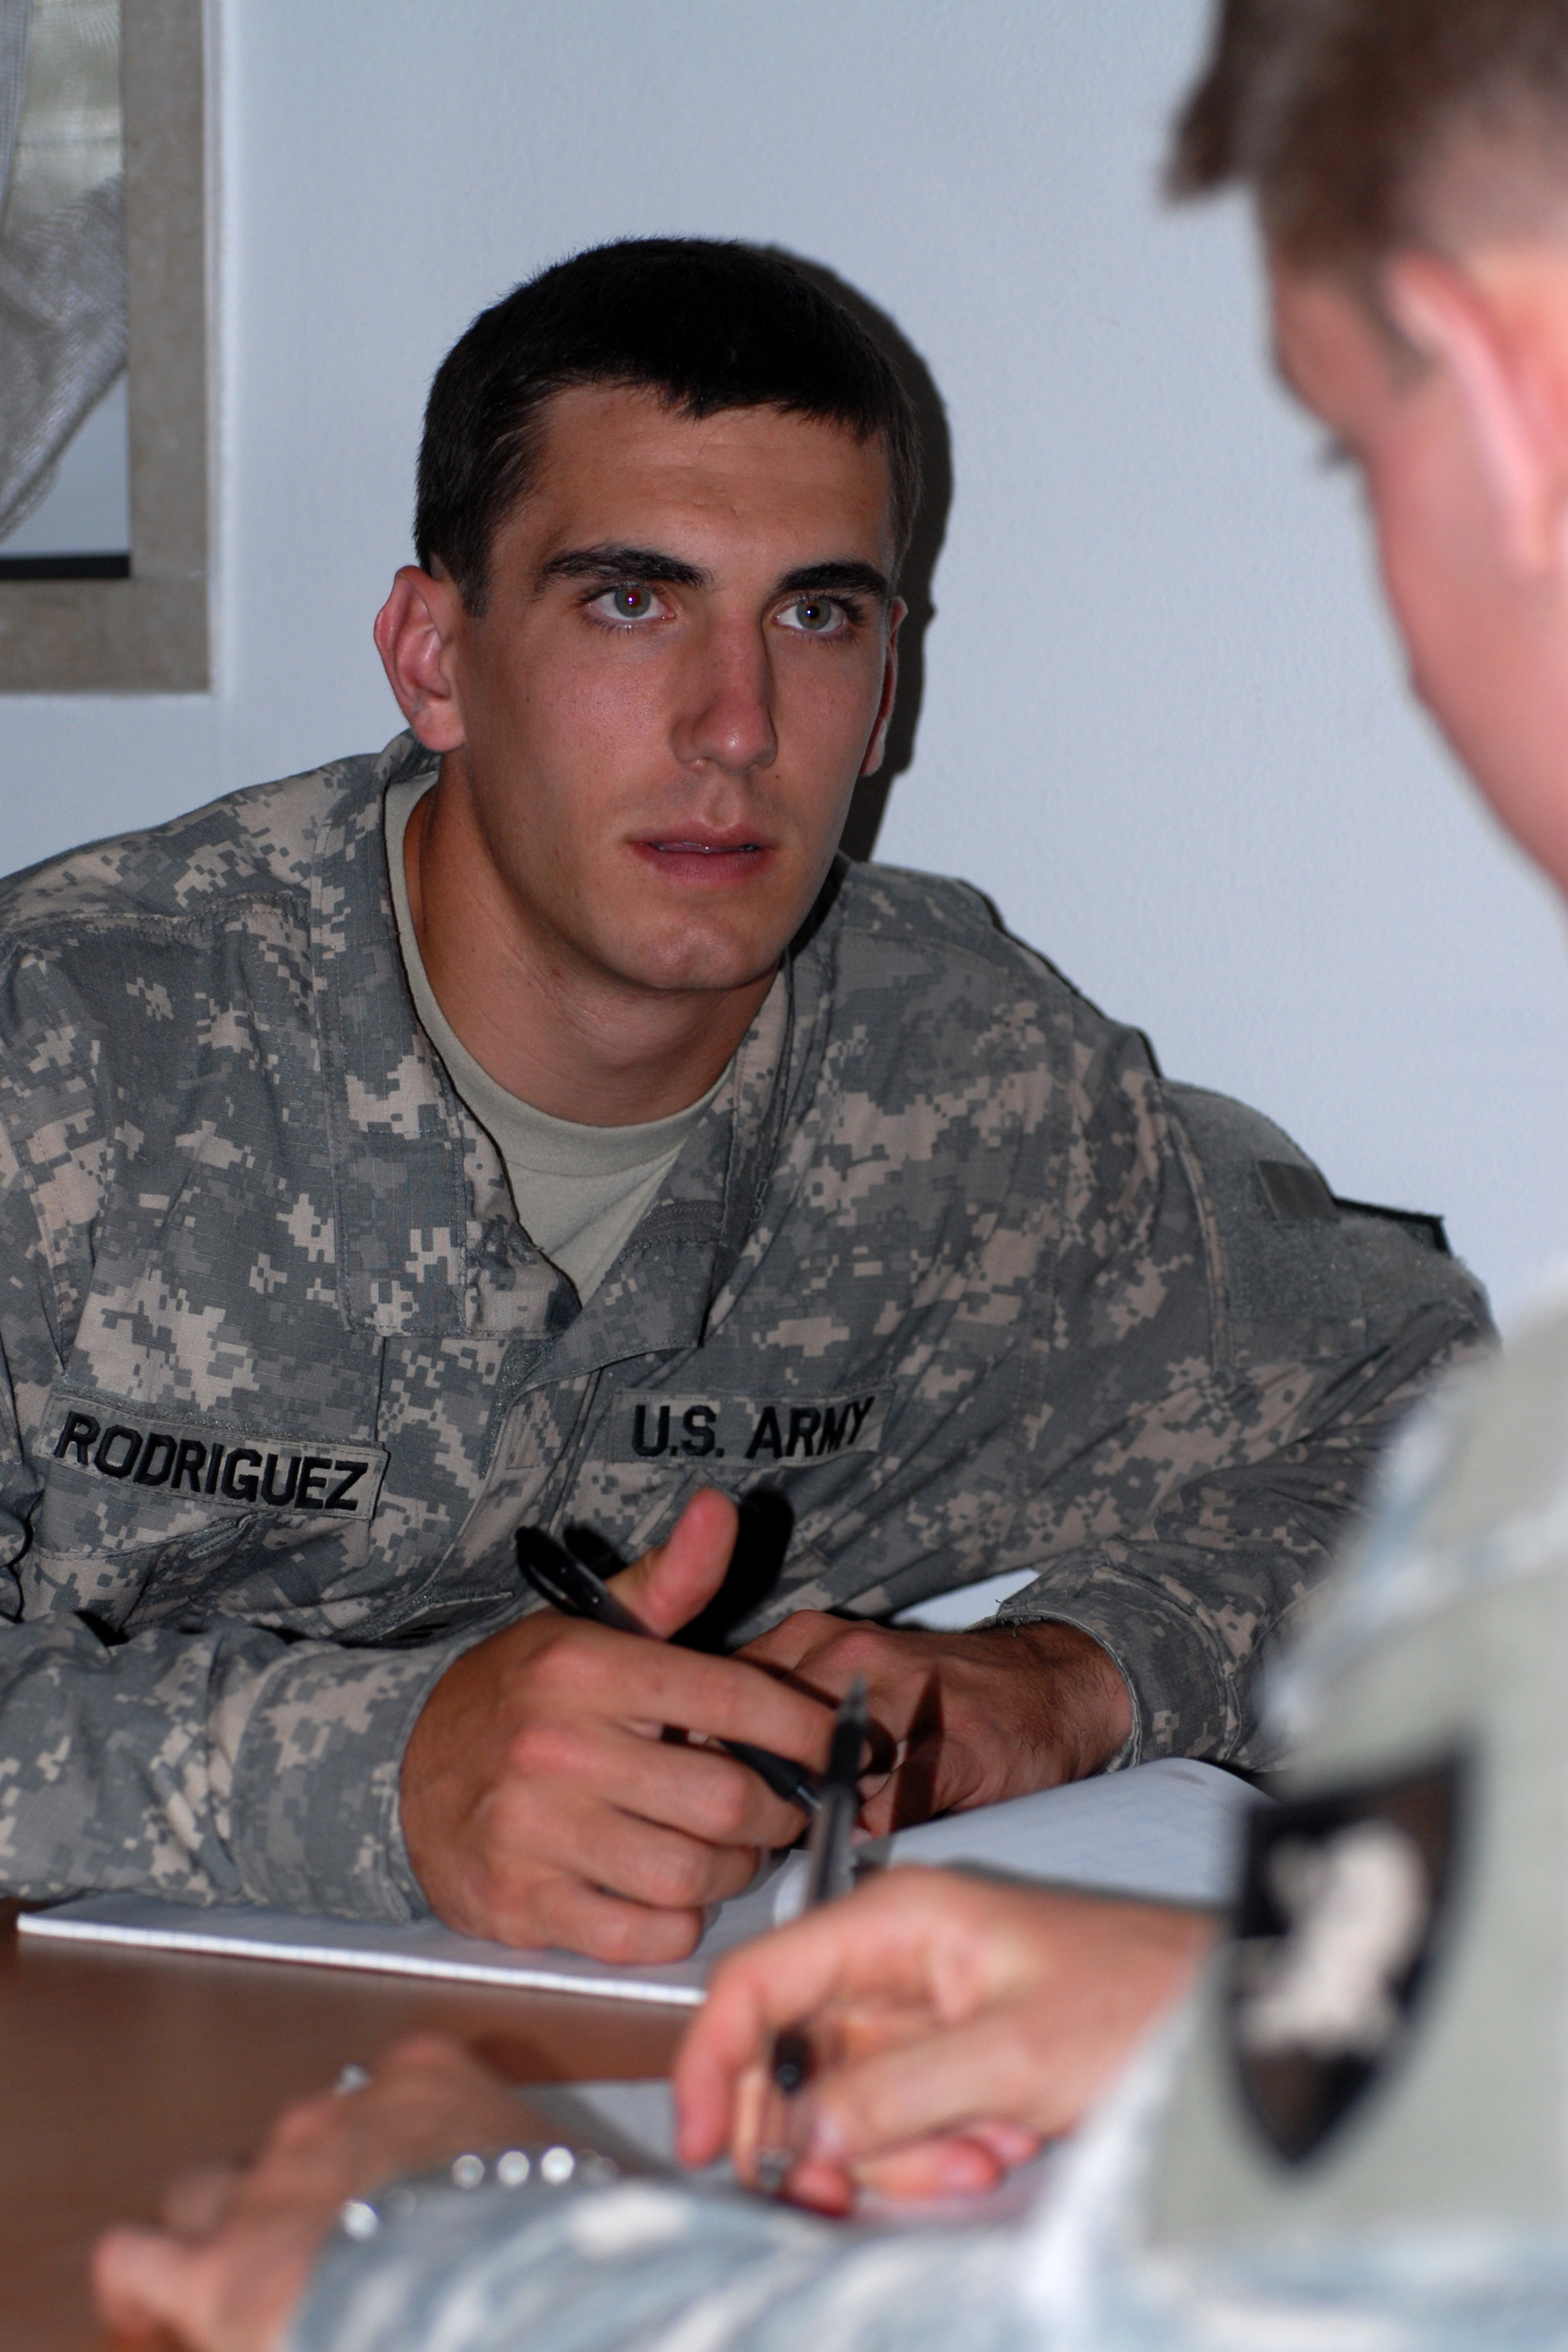 West Point cadets at U.S. Army Africa, 07-2010